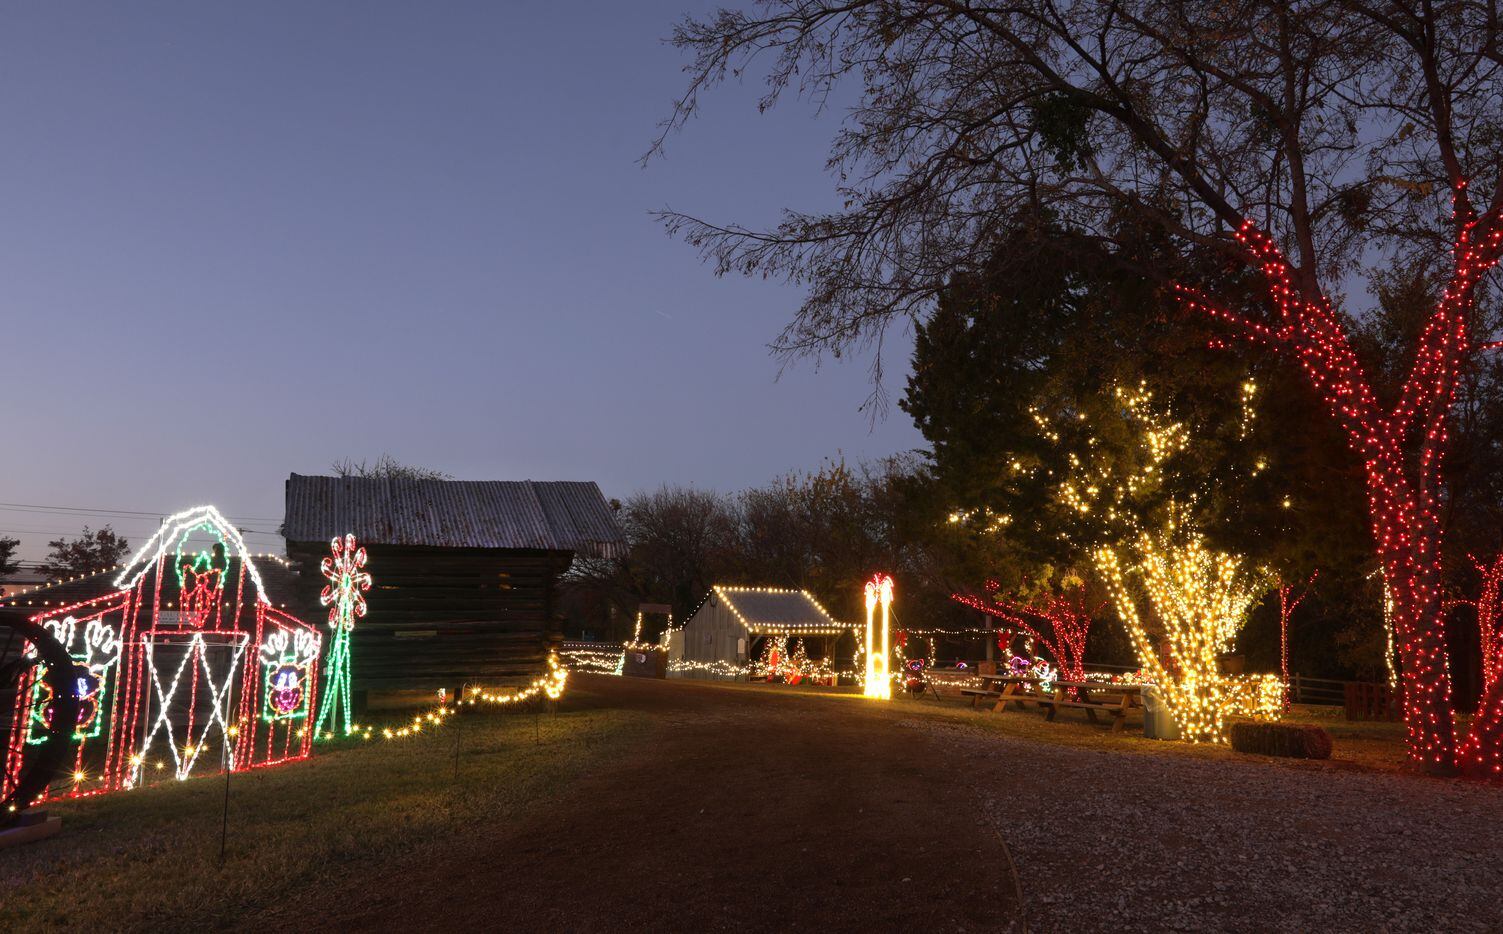 Heritage Farmstead Museum's Lights on the Farm in Plano includes more than a million lights...